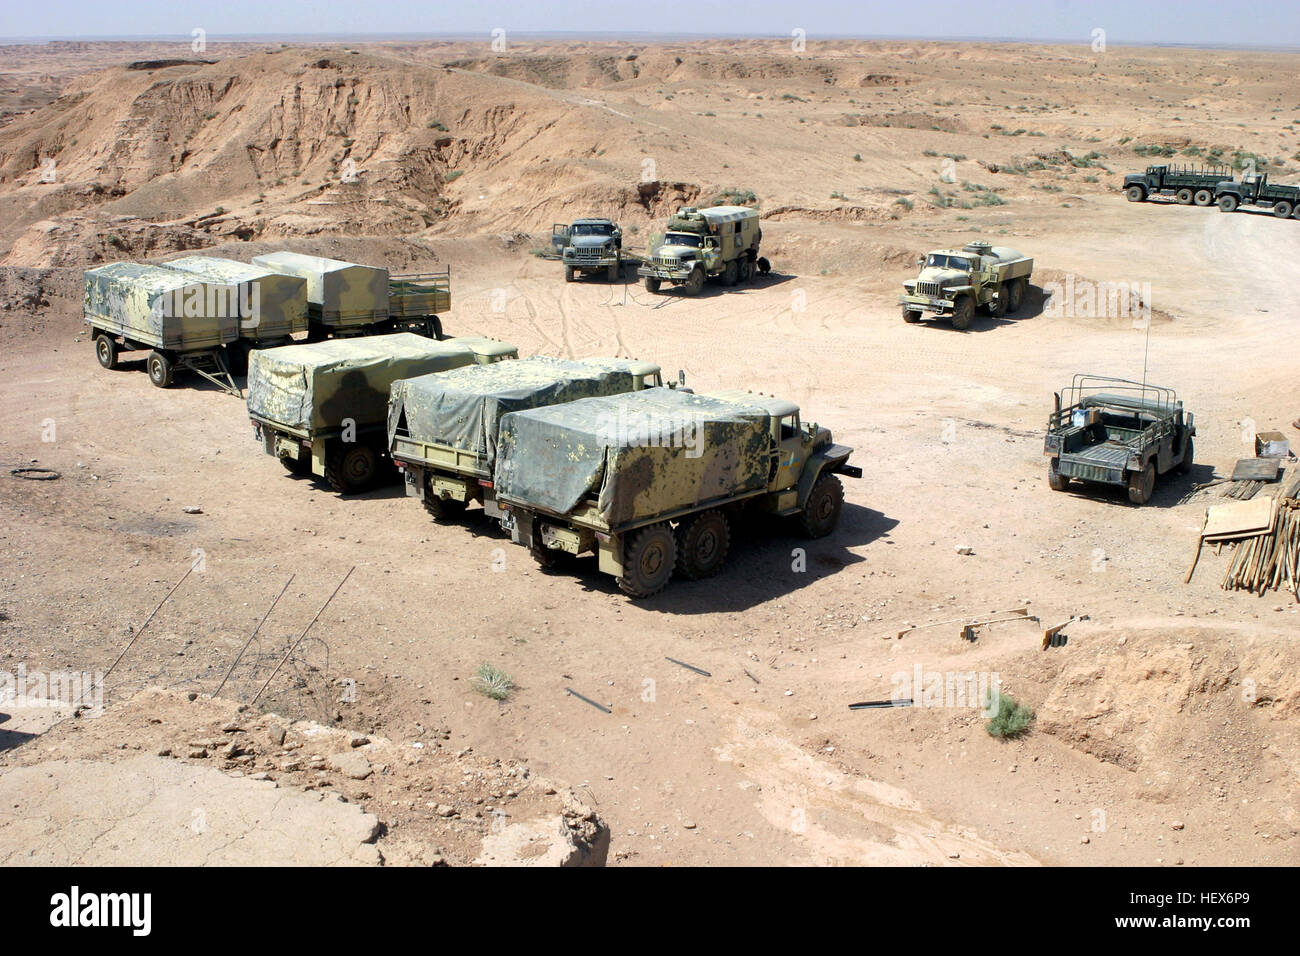 A US Marine Corps (USMC) High-Mobility Multipurpose Wheeled Vehicle (right), sits with several Ukraine Army Ural–4320-10 (6x6) 4,500kg trucks, and equipment trailers at a vehicle staging park located at Badrah, Iraq, during Operation IRAQI FREEDOM. Ukrainian military vehicles in Iraq Stock Photo